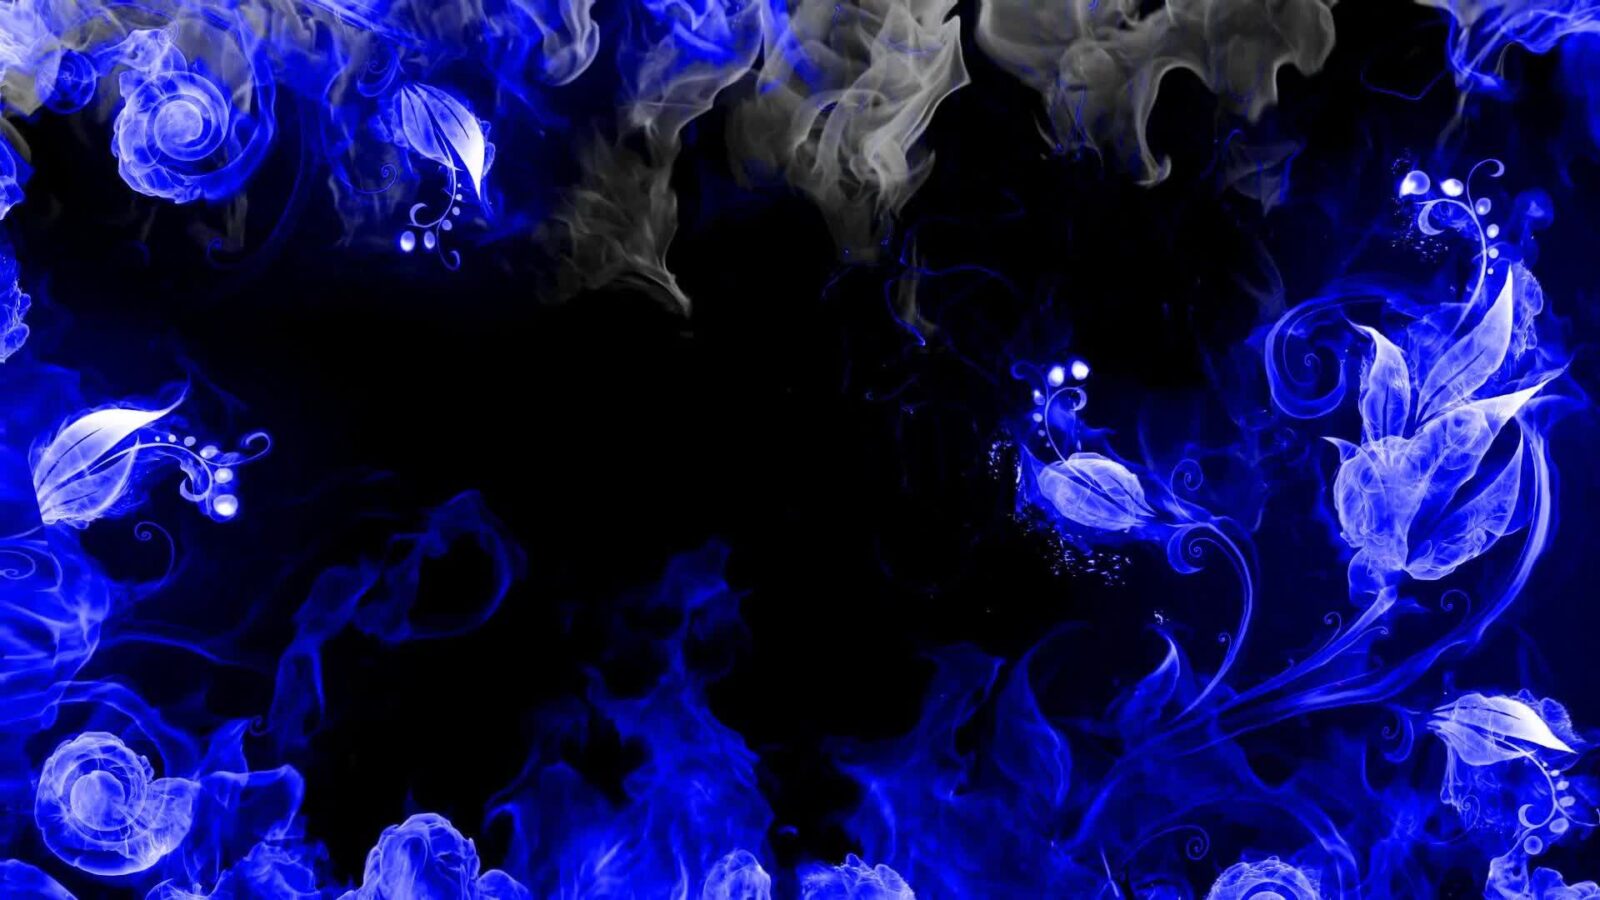 Blue Flowers and Dark Smoke Abstract Artwork – Free Live Wallpaper